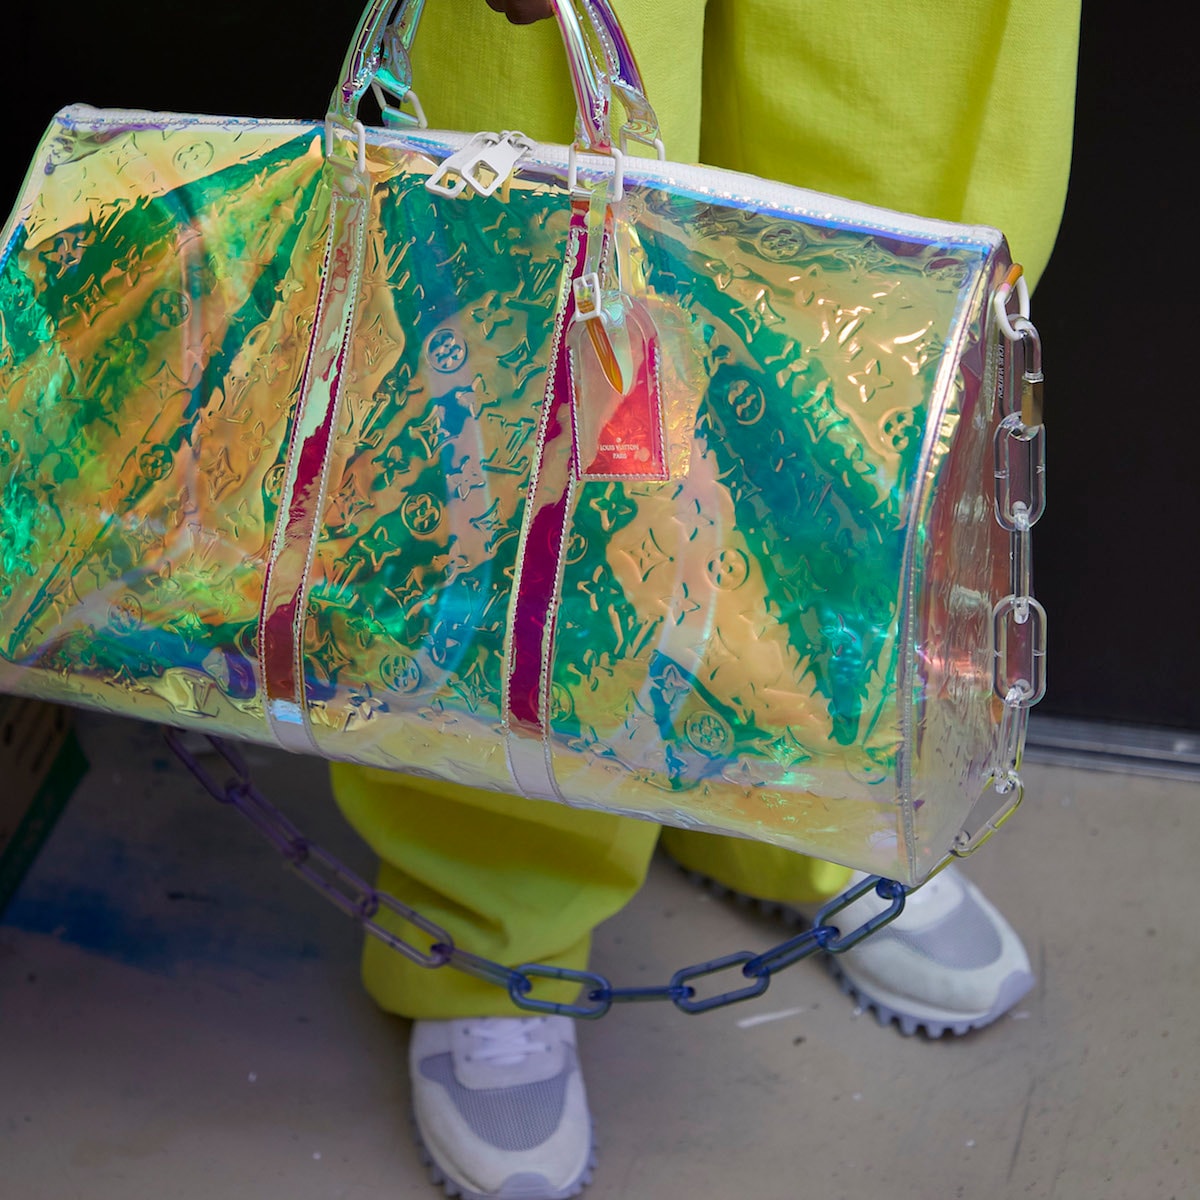 All Louis Vuitton bags by Virgil Abloh that have shaped his